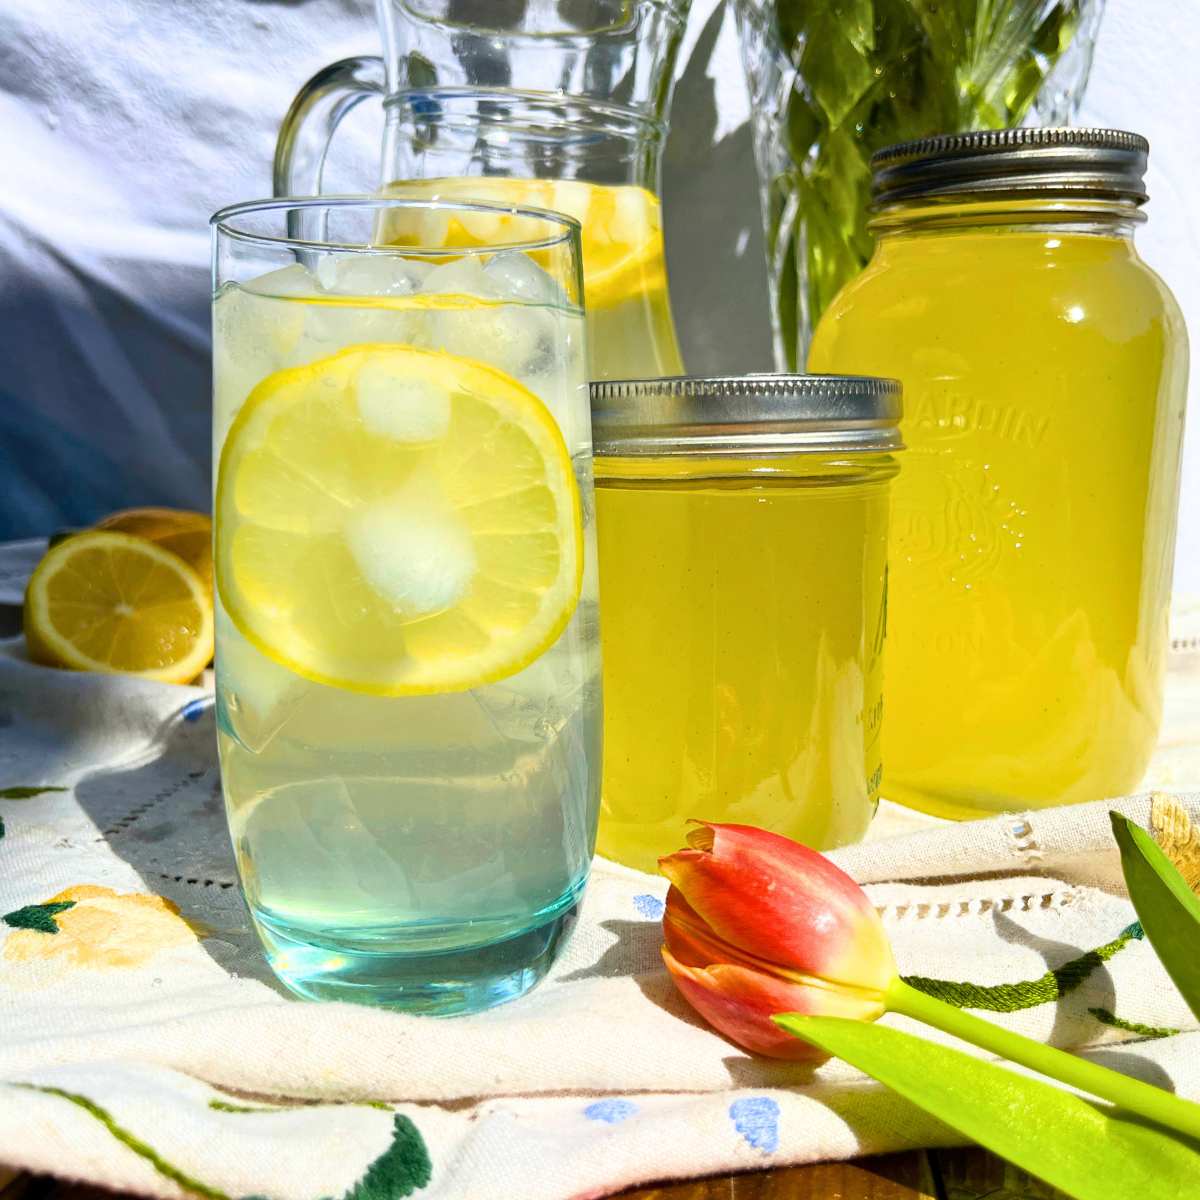 A glass of lemonade with ice and a lemon slice inside. There are two glass canning jars of concentrated lemon liquid beside and a tulip in the foreground.